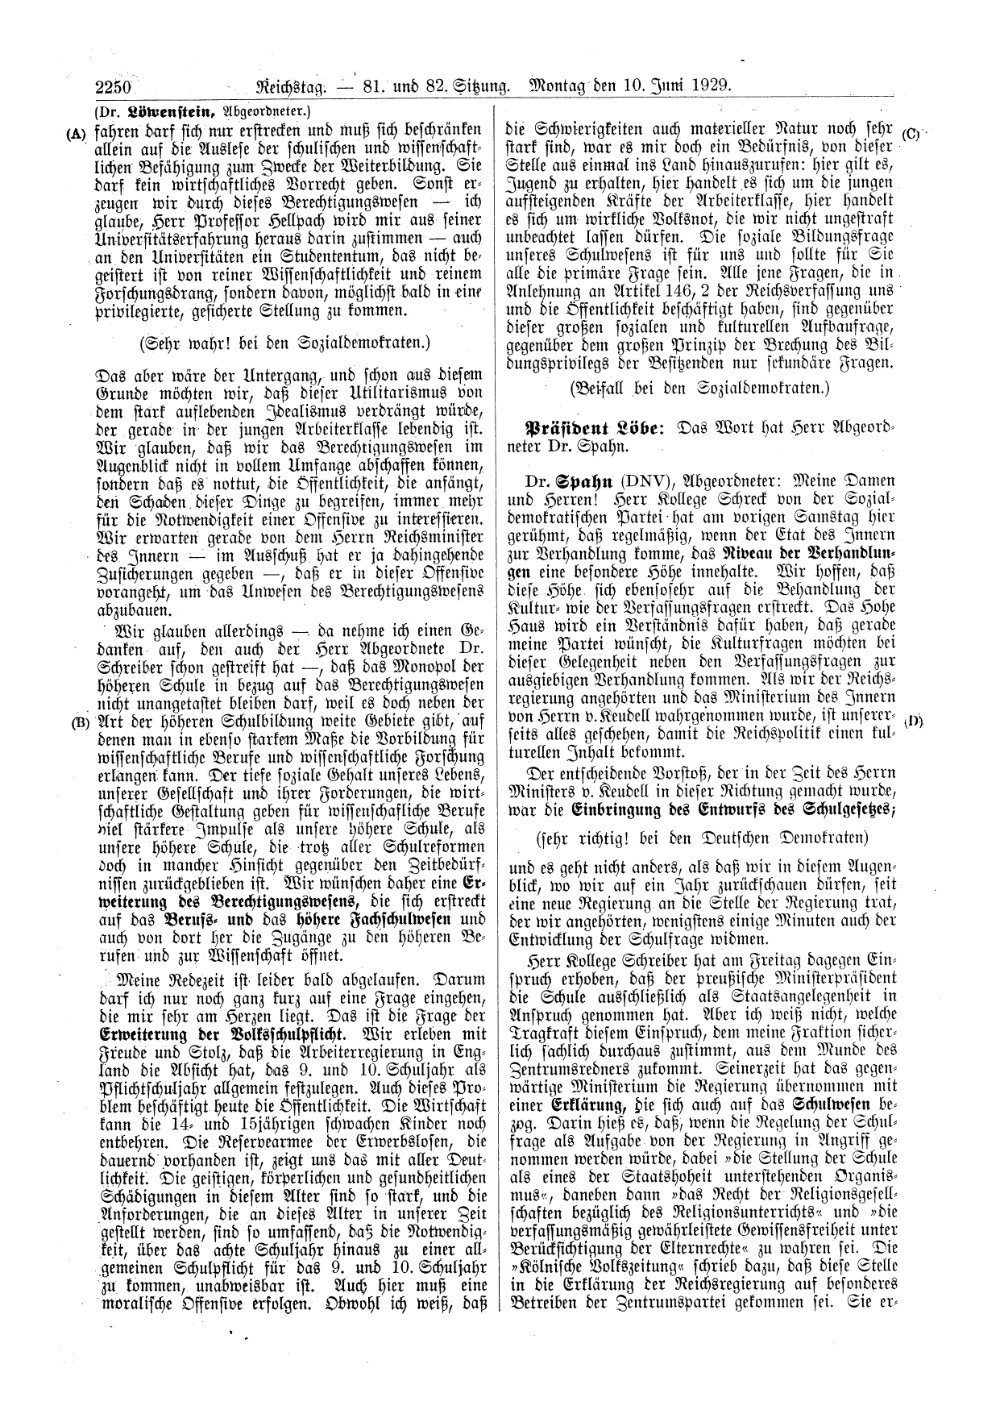 Scan of page 2250